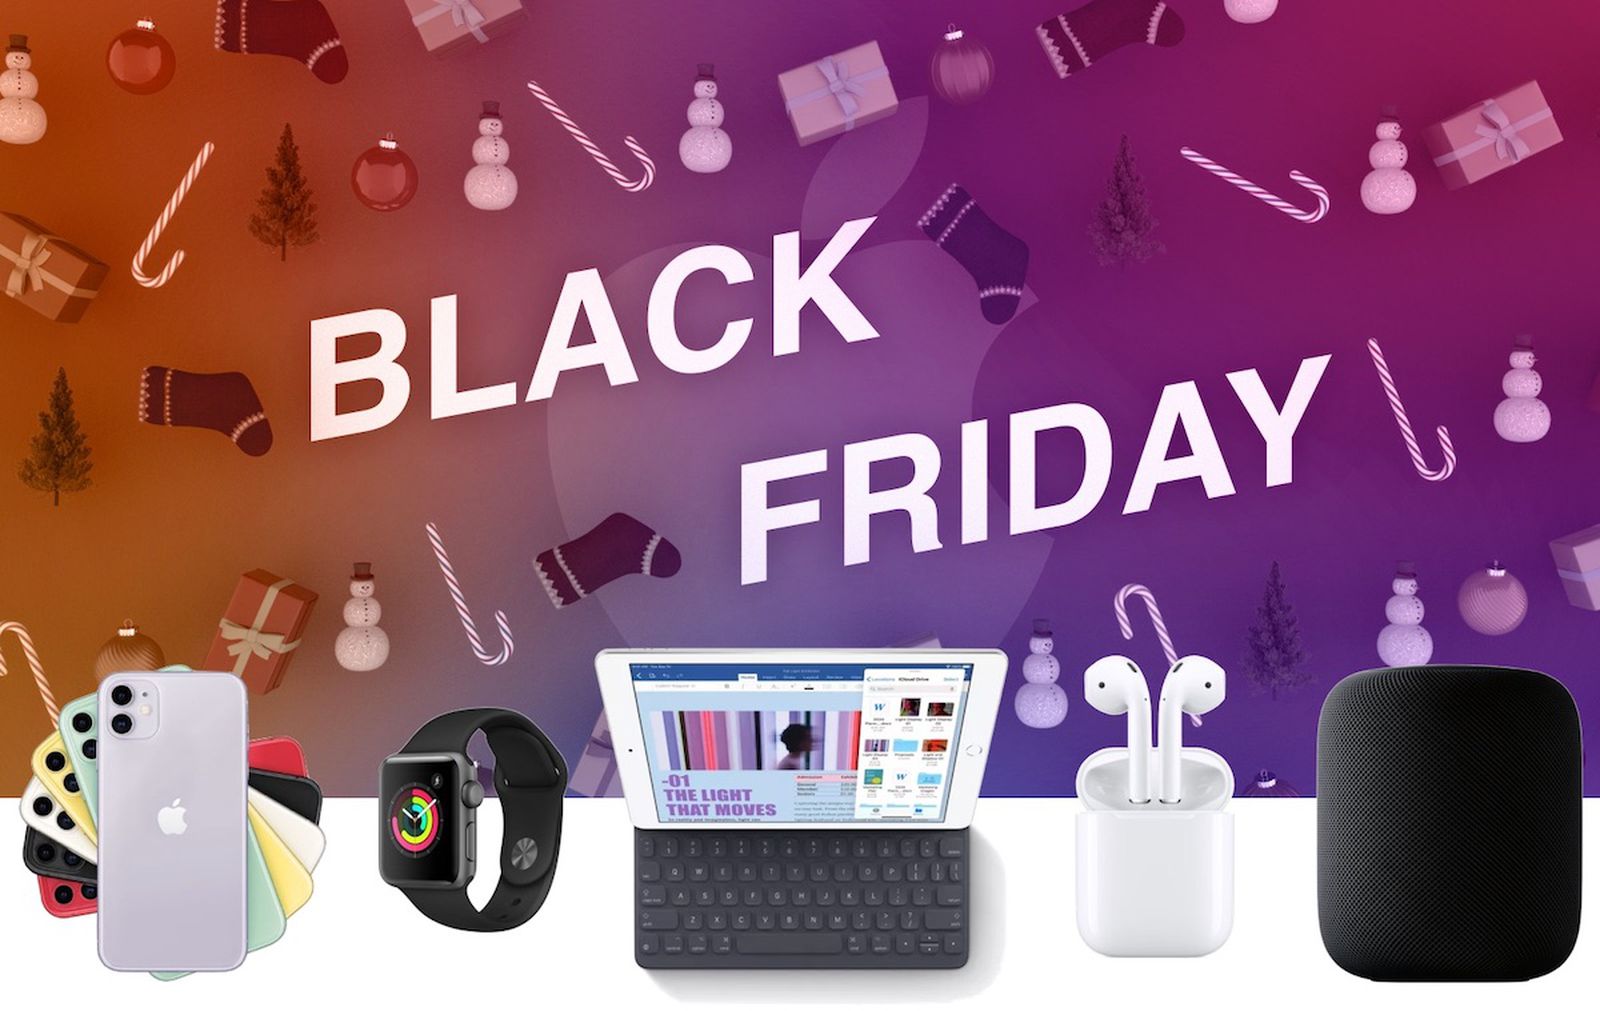 Black Friday 2019 Best Deals On Apple Products Including Iphone Homepod Airpods And More Macrumors